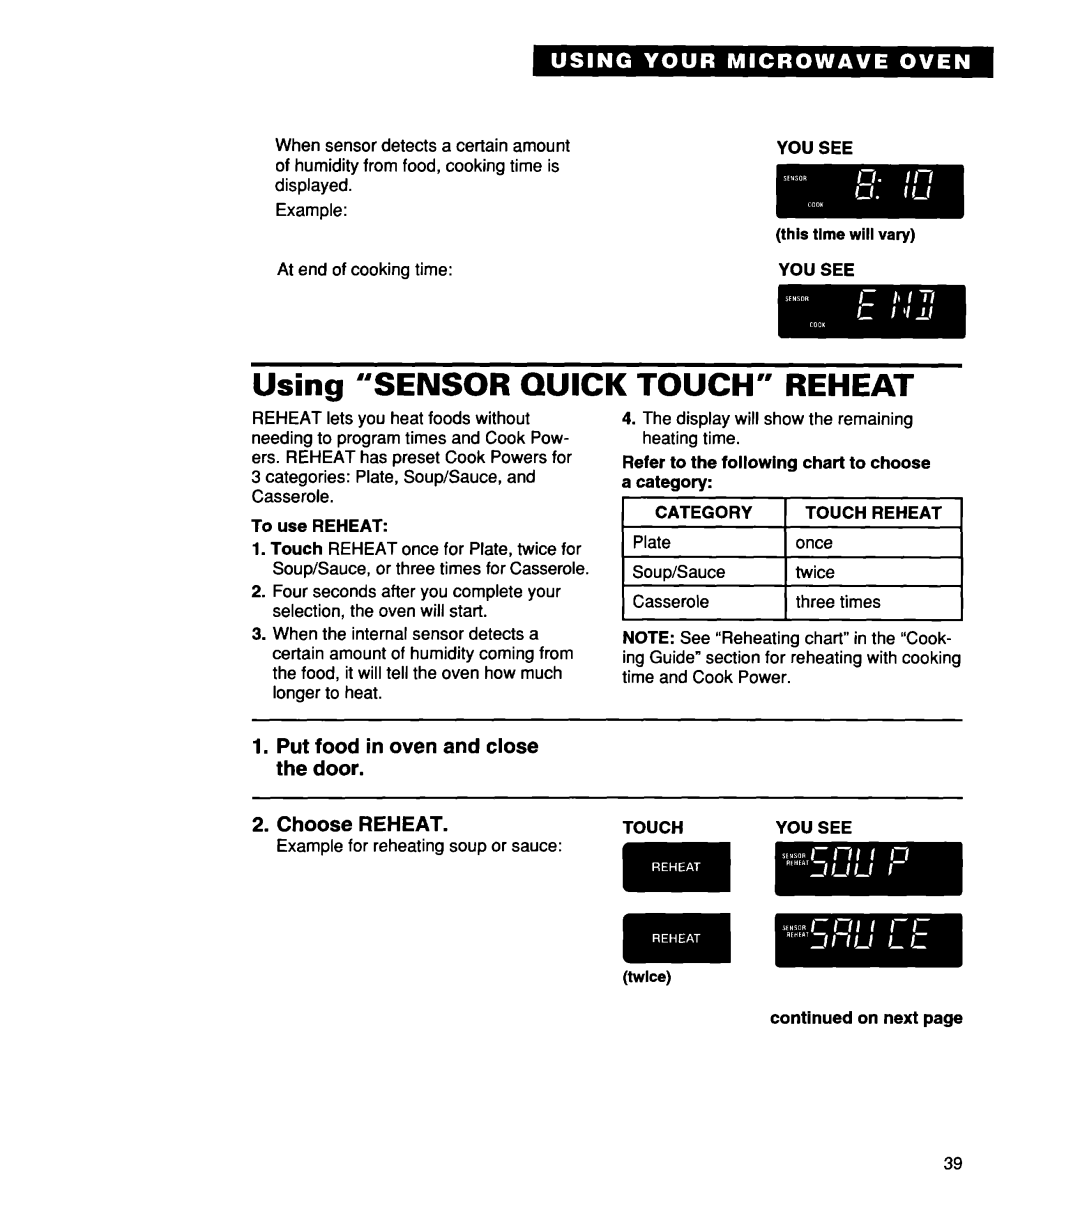 Whirlpool MH7135XE warranty Touch” Reheat, Choose REHEAT, Using “SENSOR QUICK, Put food in oven and close the door 